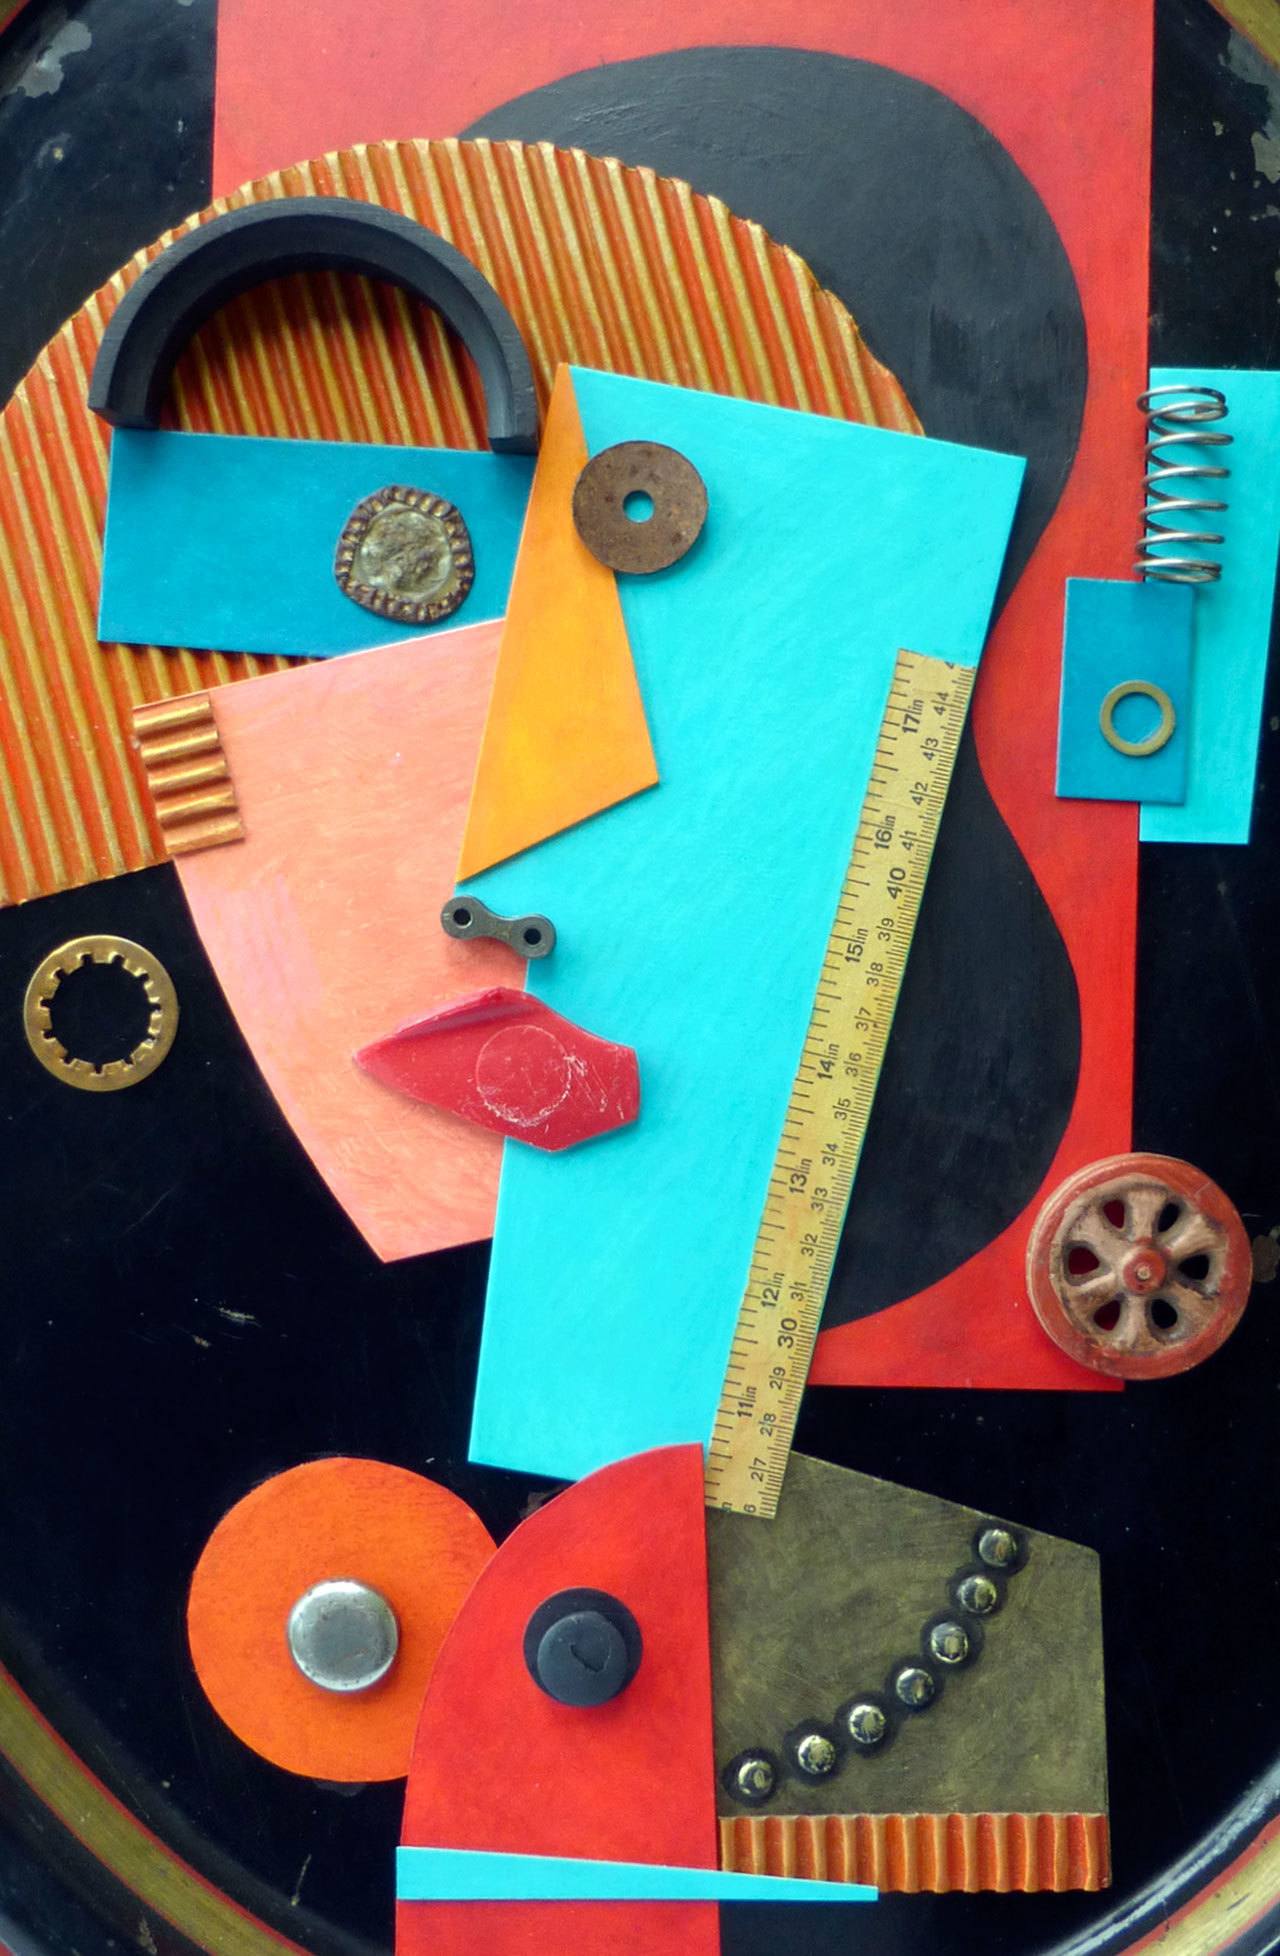 A portrait of an artist assemblage by Karin Anderson.